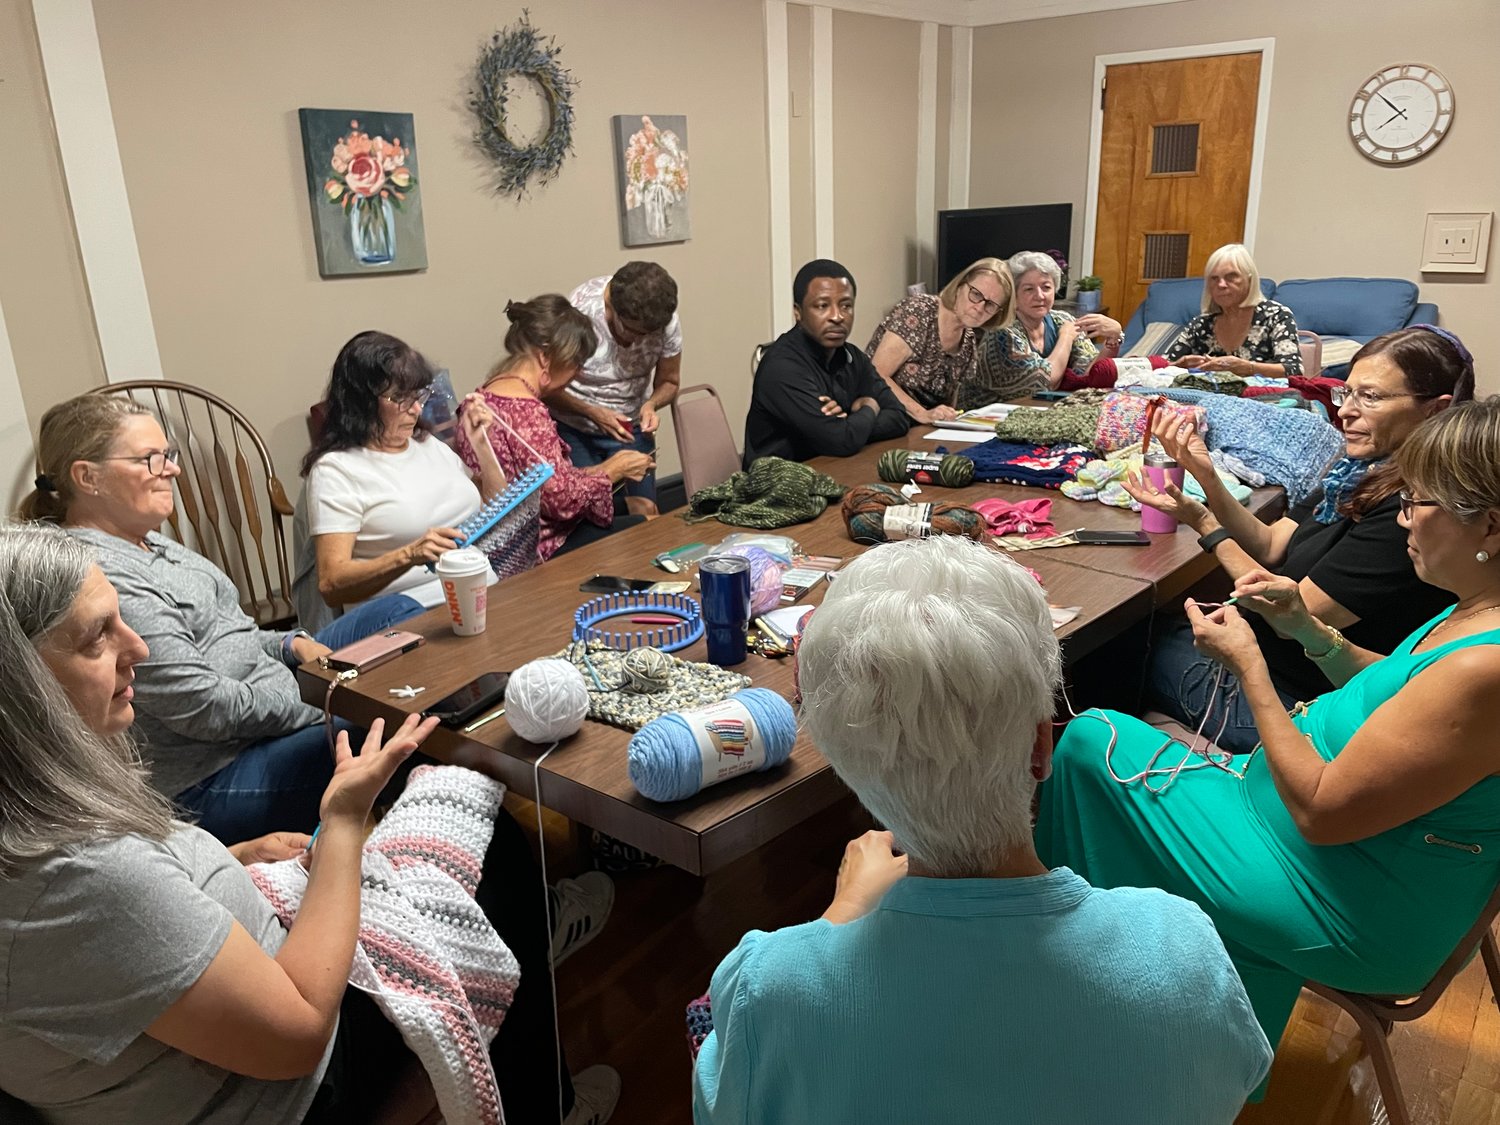 The Prayer Shawl Ministry knitting group gathered at Our Lady of Lourdes parish center on Sept. 22 to crochet for the needy, in addition to sharing stories and advice on technique.